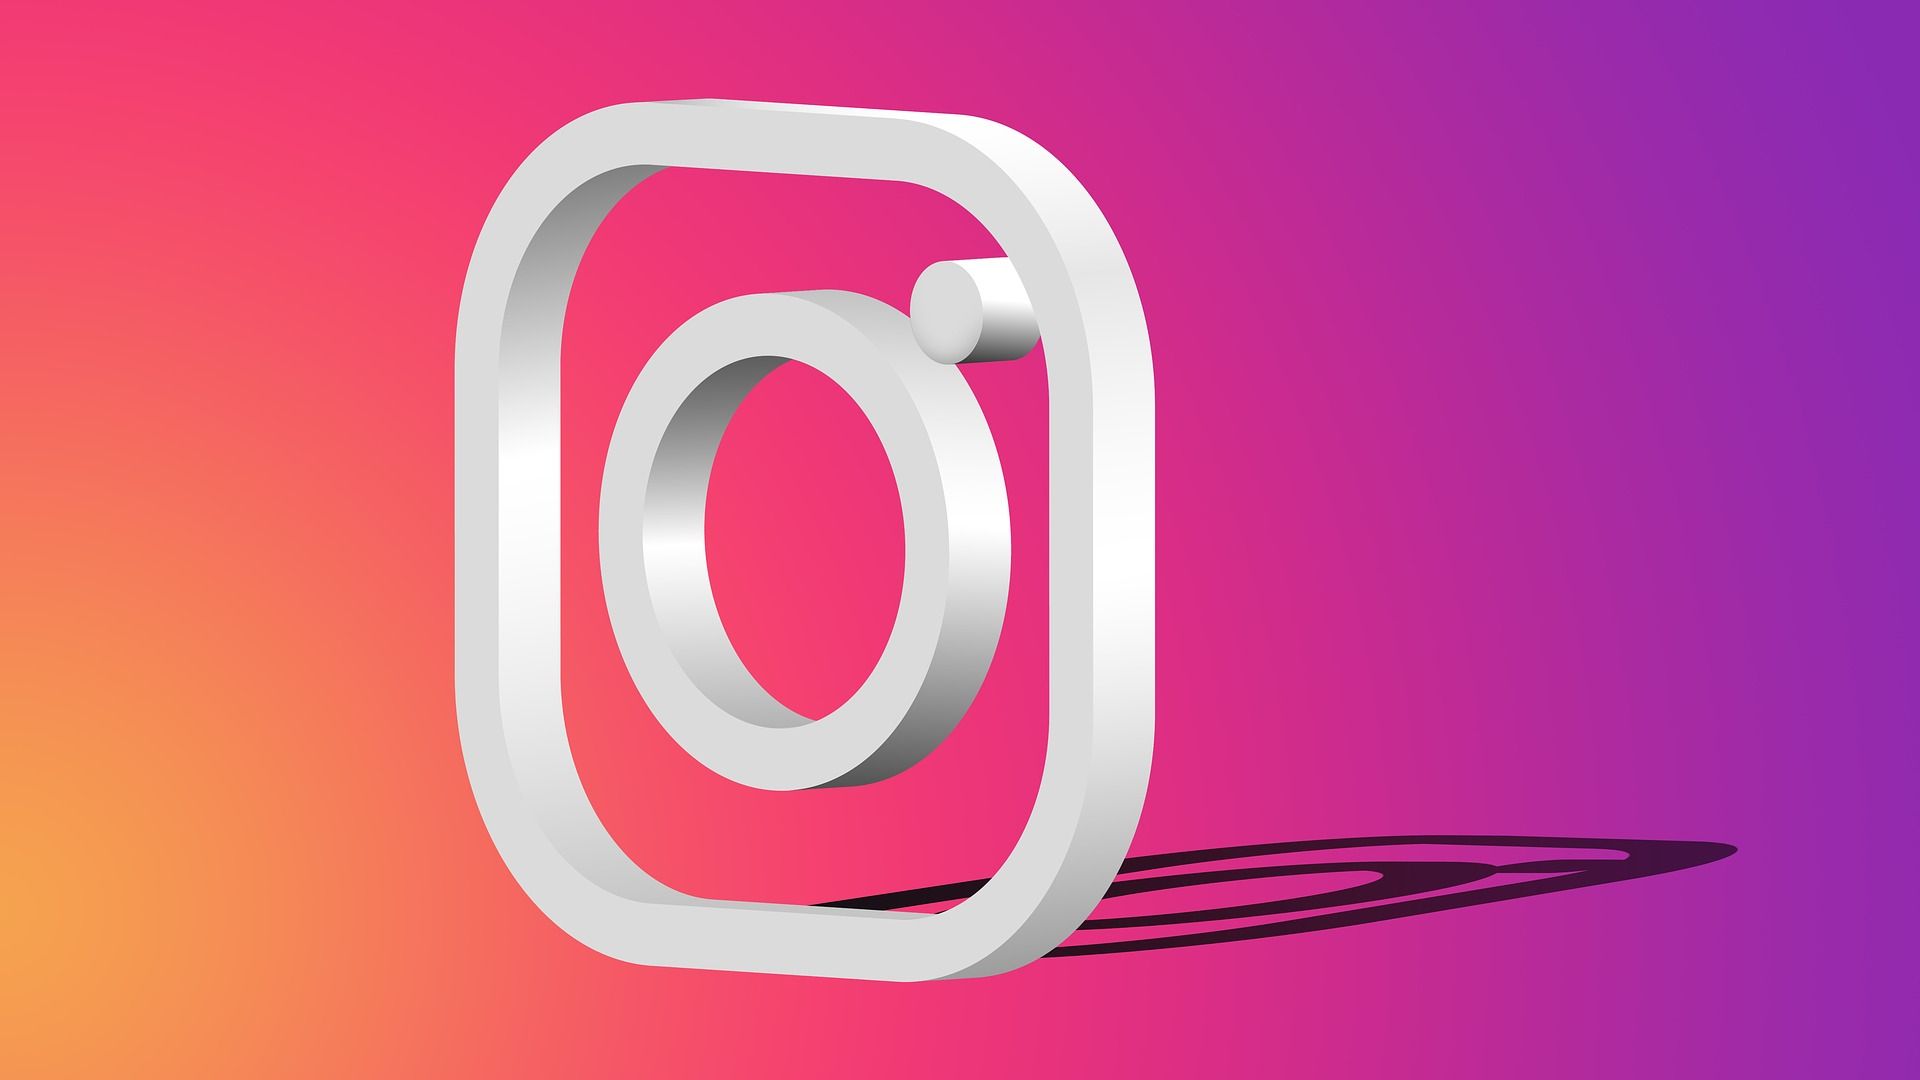 Buy Instagram likes fast and let your business achieve more